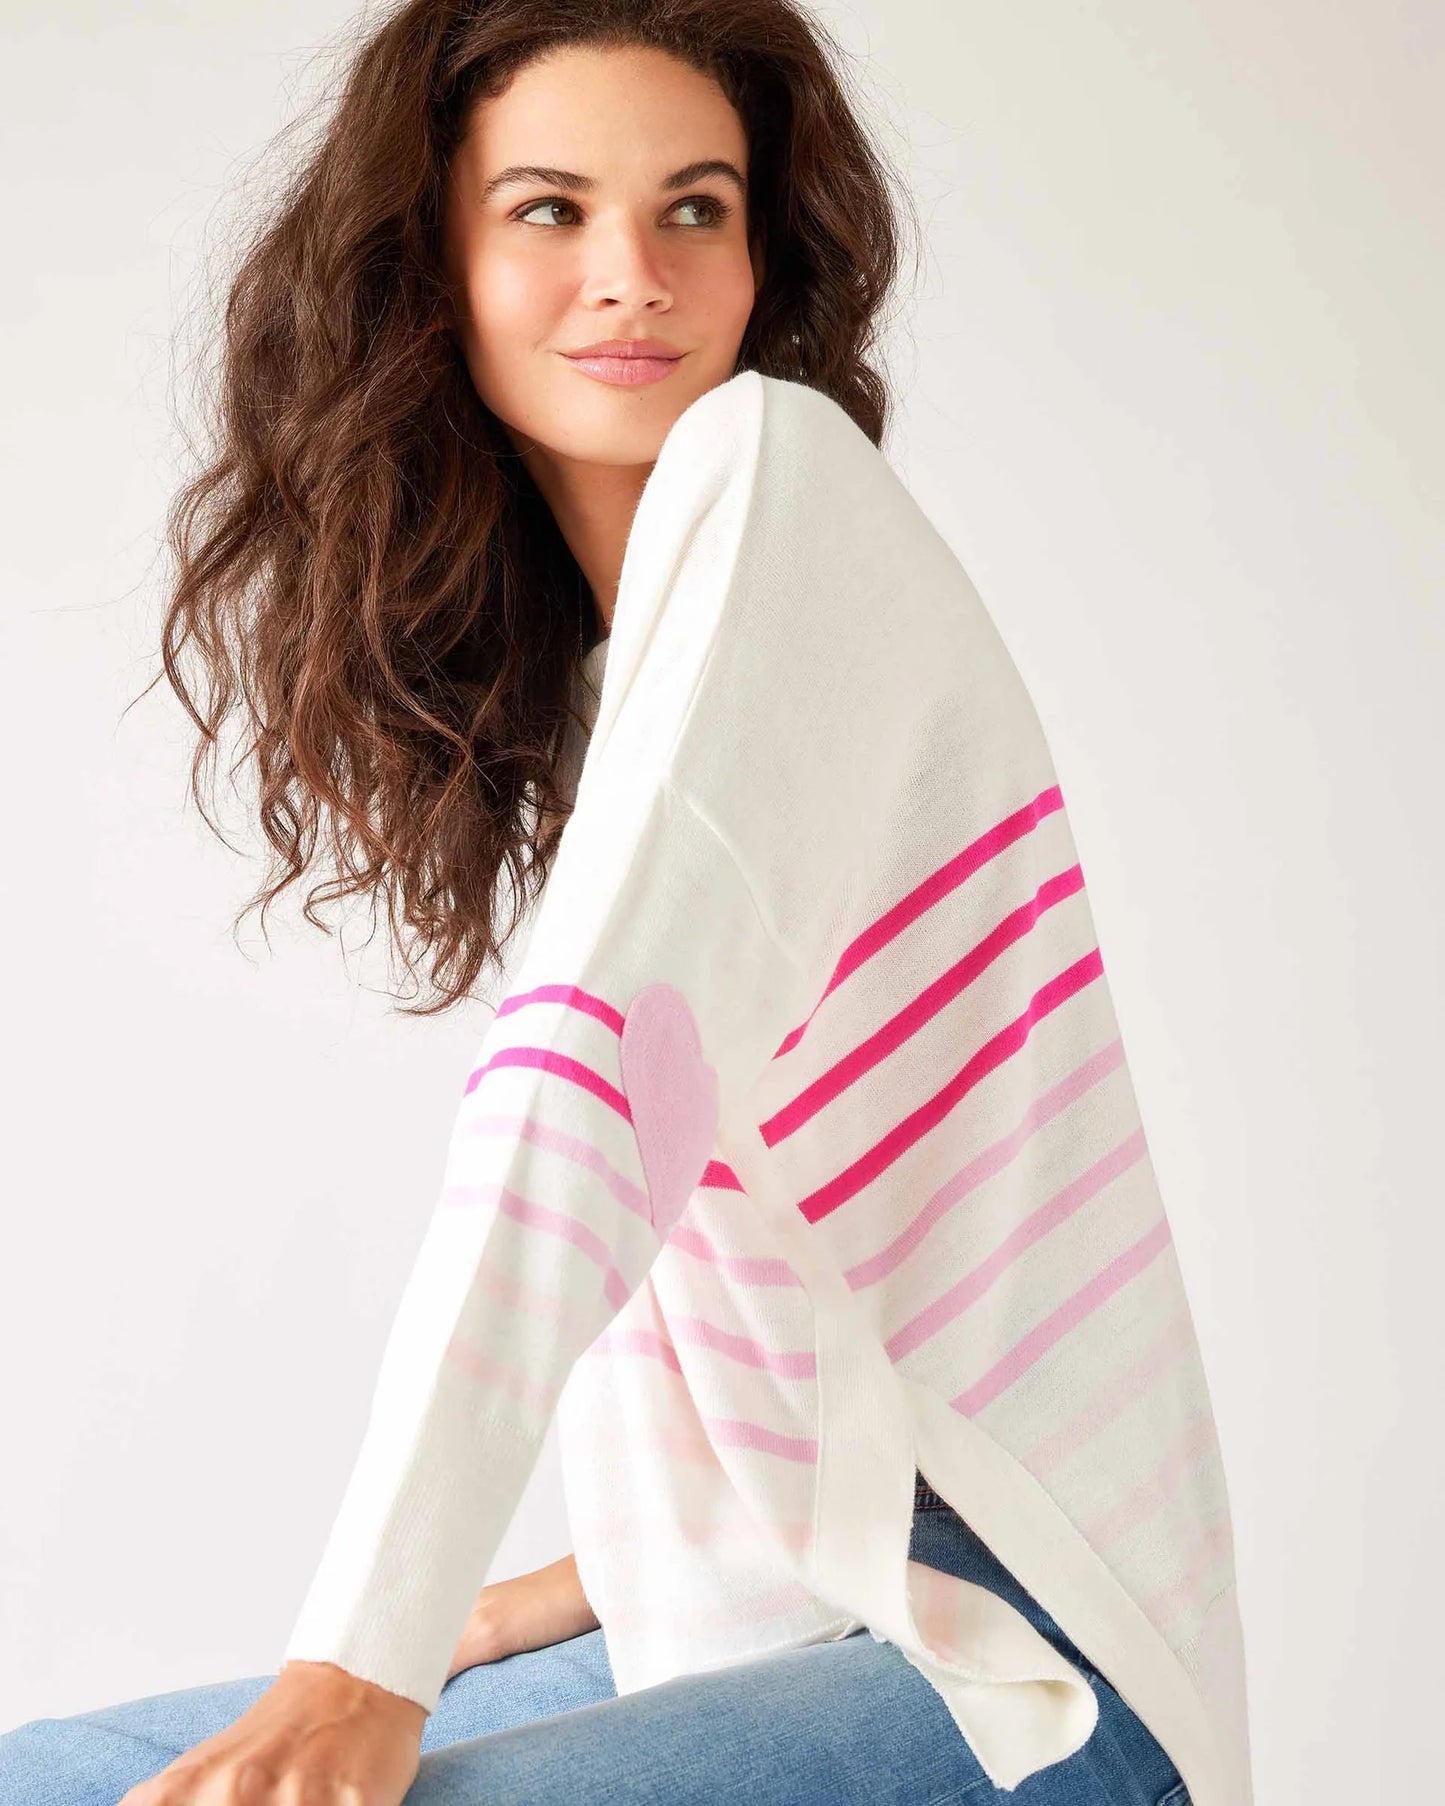 MerSea - Amour Sweater - Pink Ombré